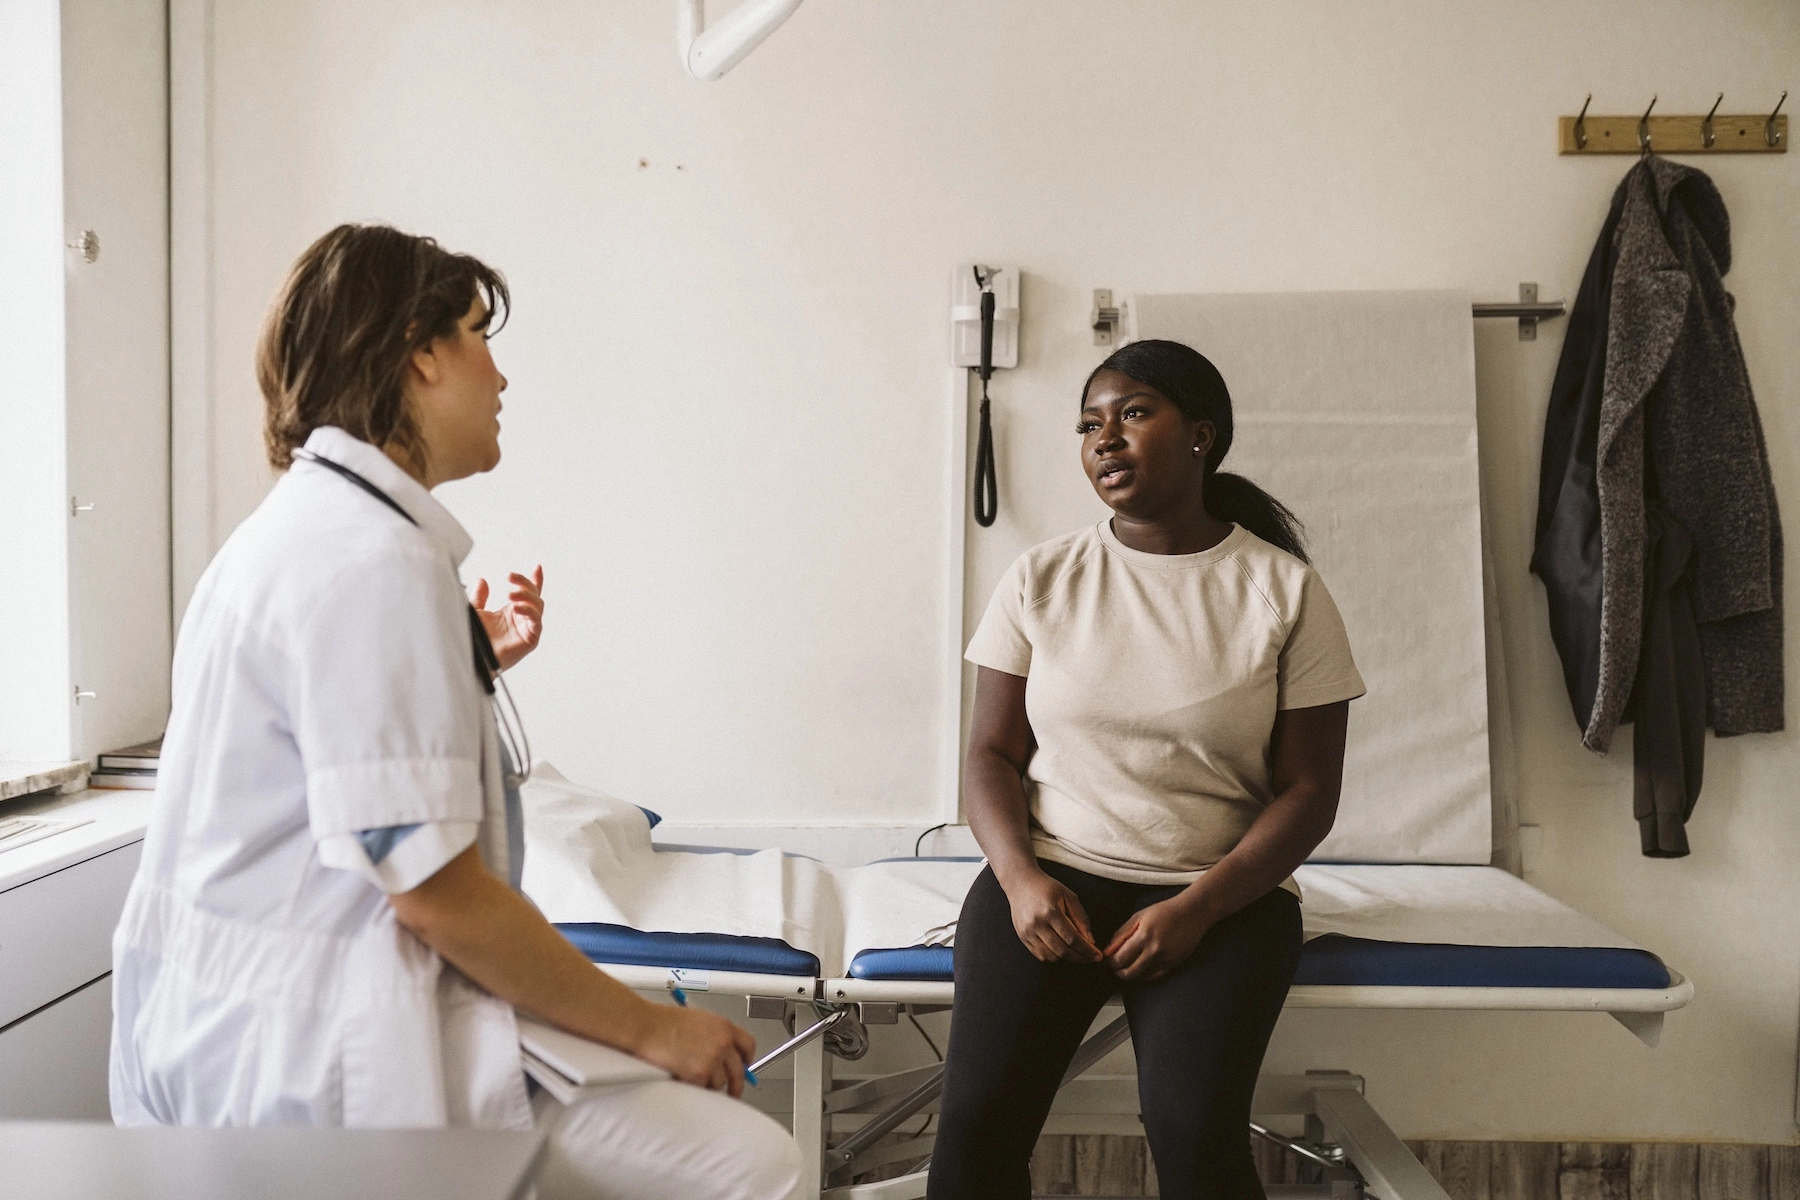 A doctor speaks with her female patient as they sit across from each other in the examination room